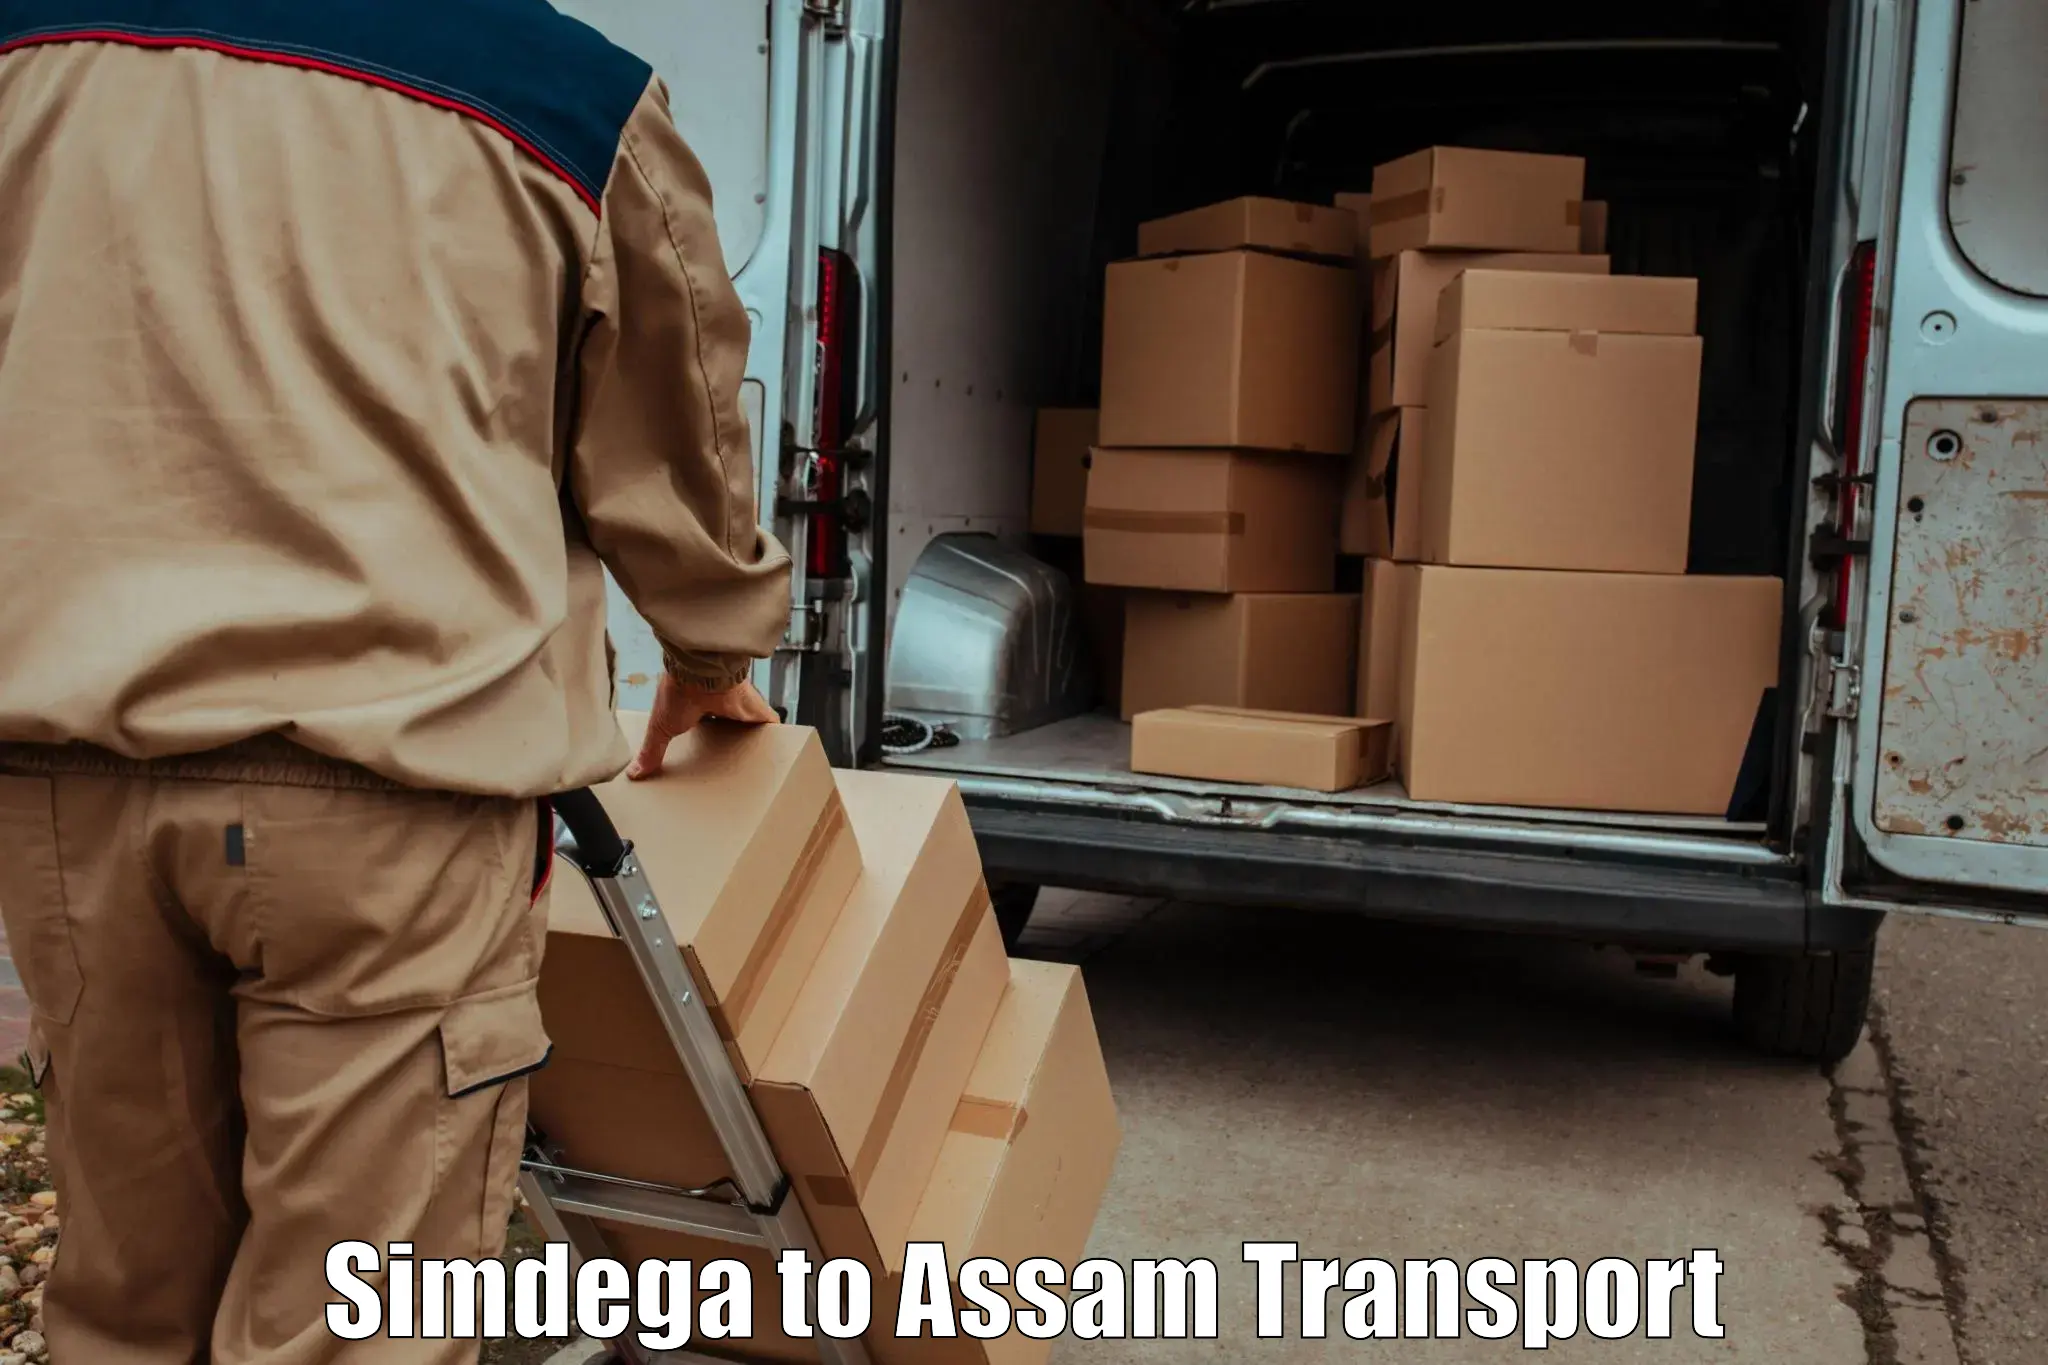 Transport bike from one state to another Simdega to Kamrup